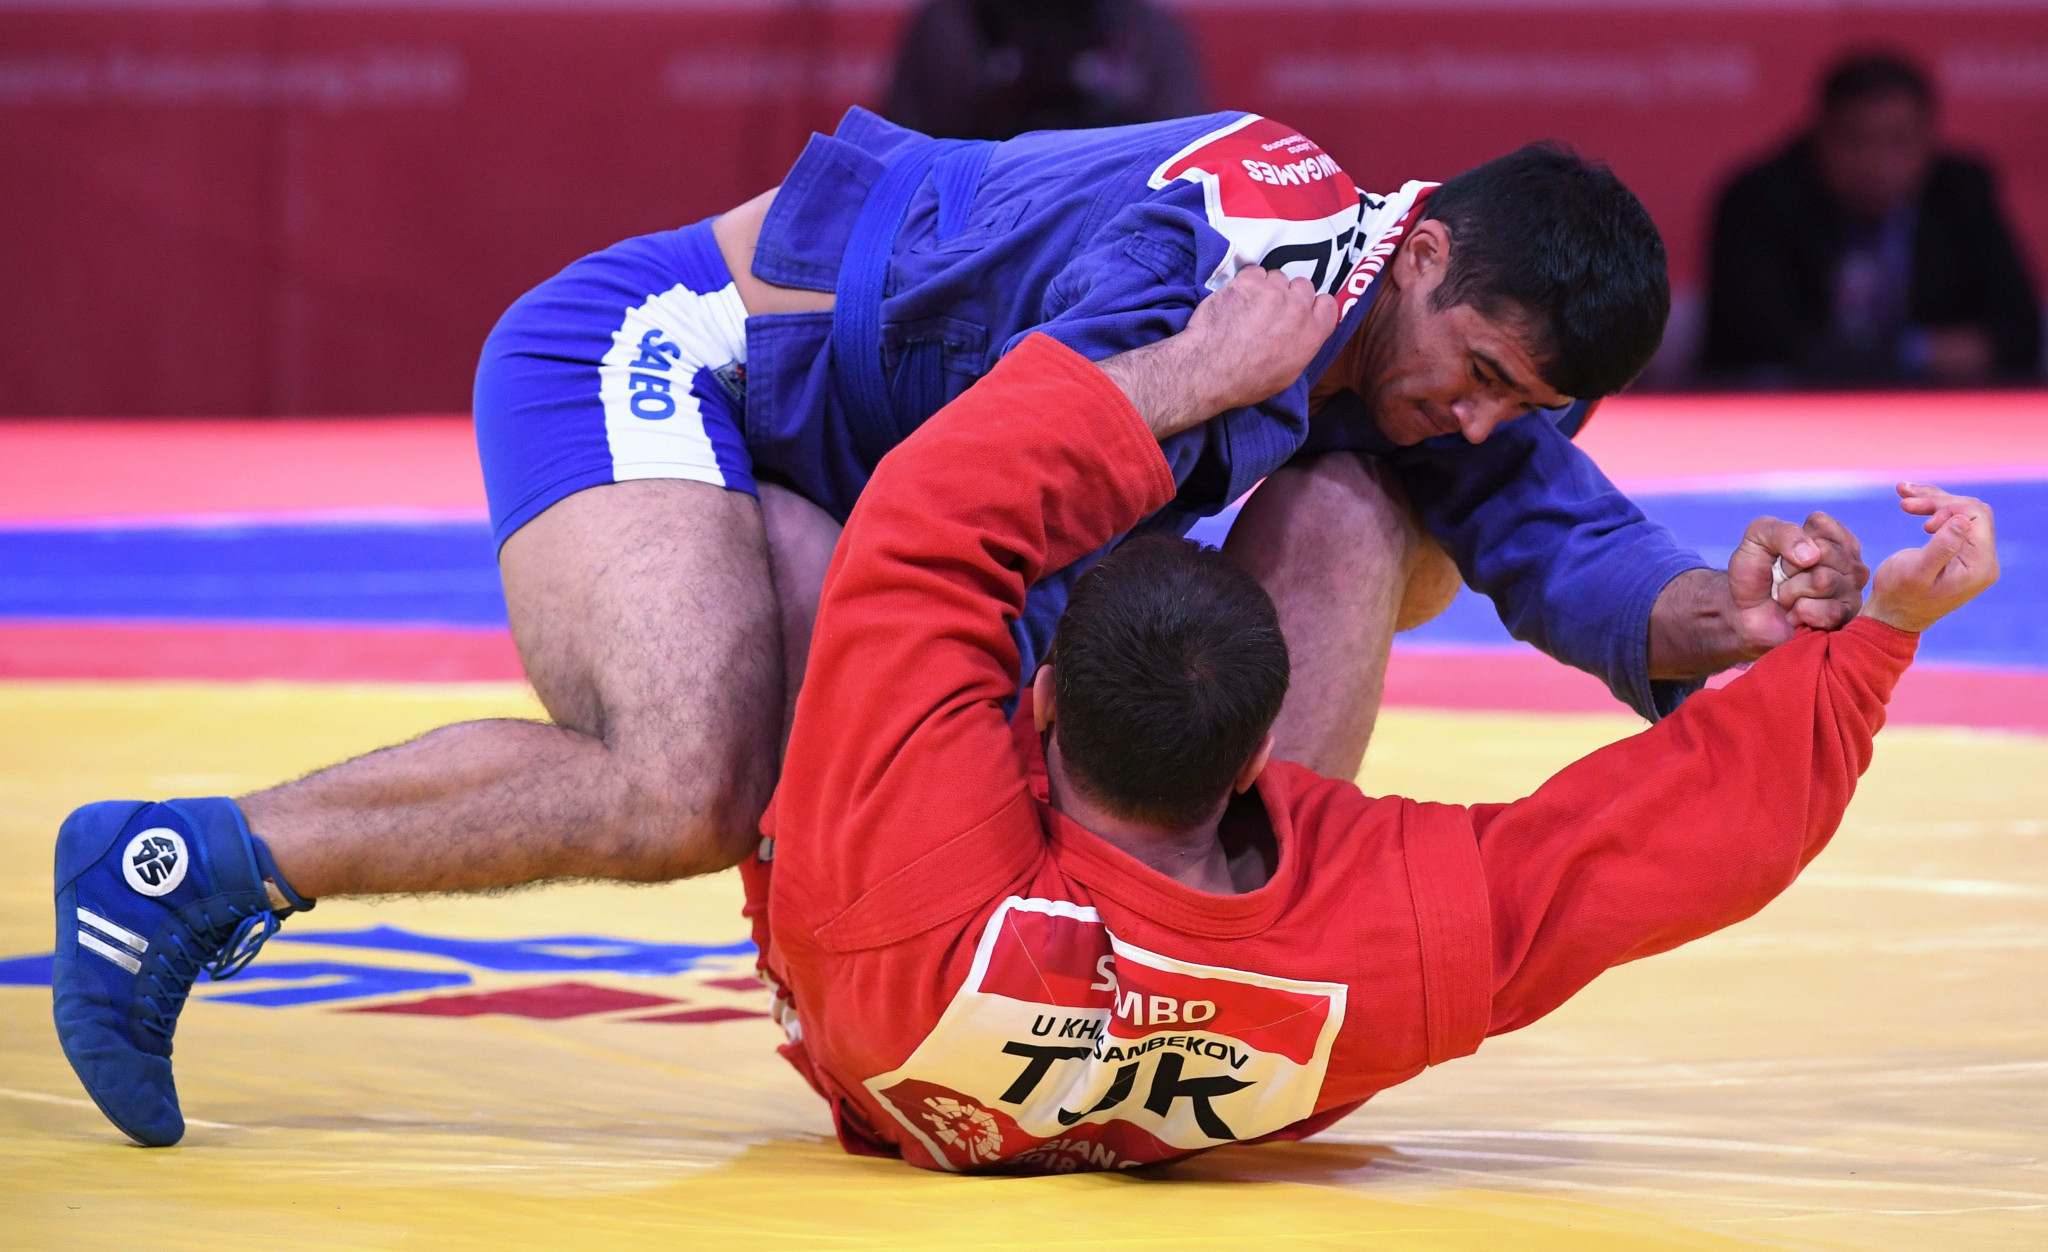 Decision on 2020 World Sambo Championships to be made by end of September